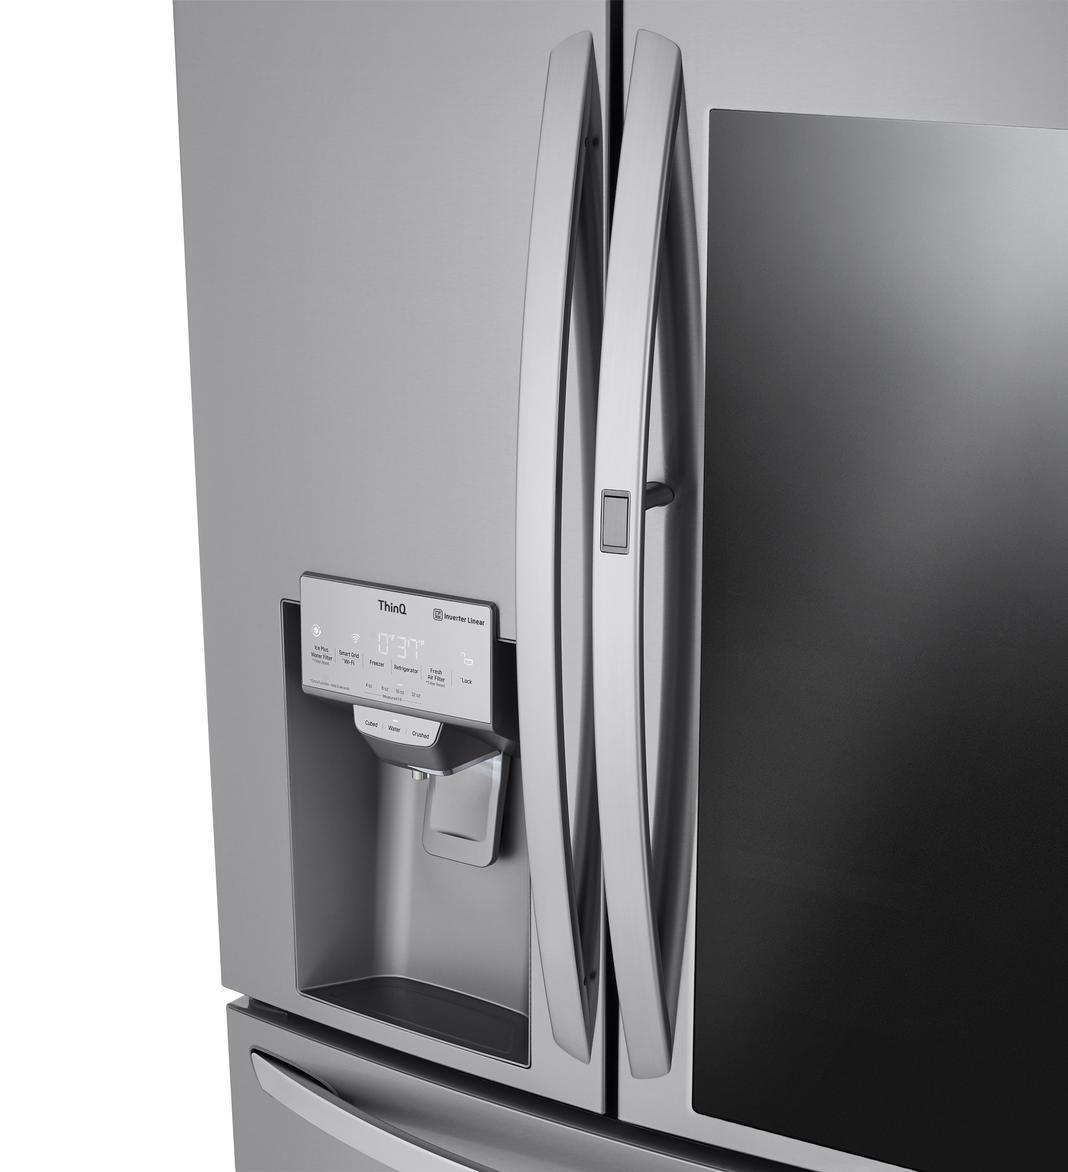 LG - 35.8 Inch 22.5 cu. ft French Door Refrigerator in Stainless - LRMVC2306S